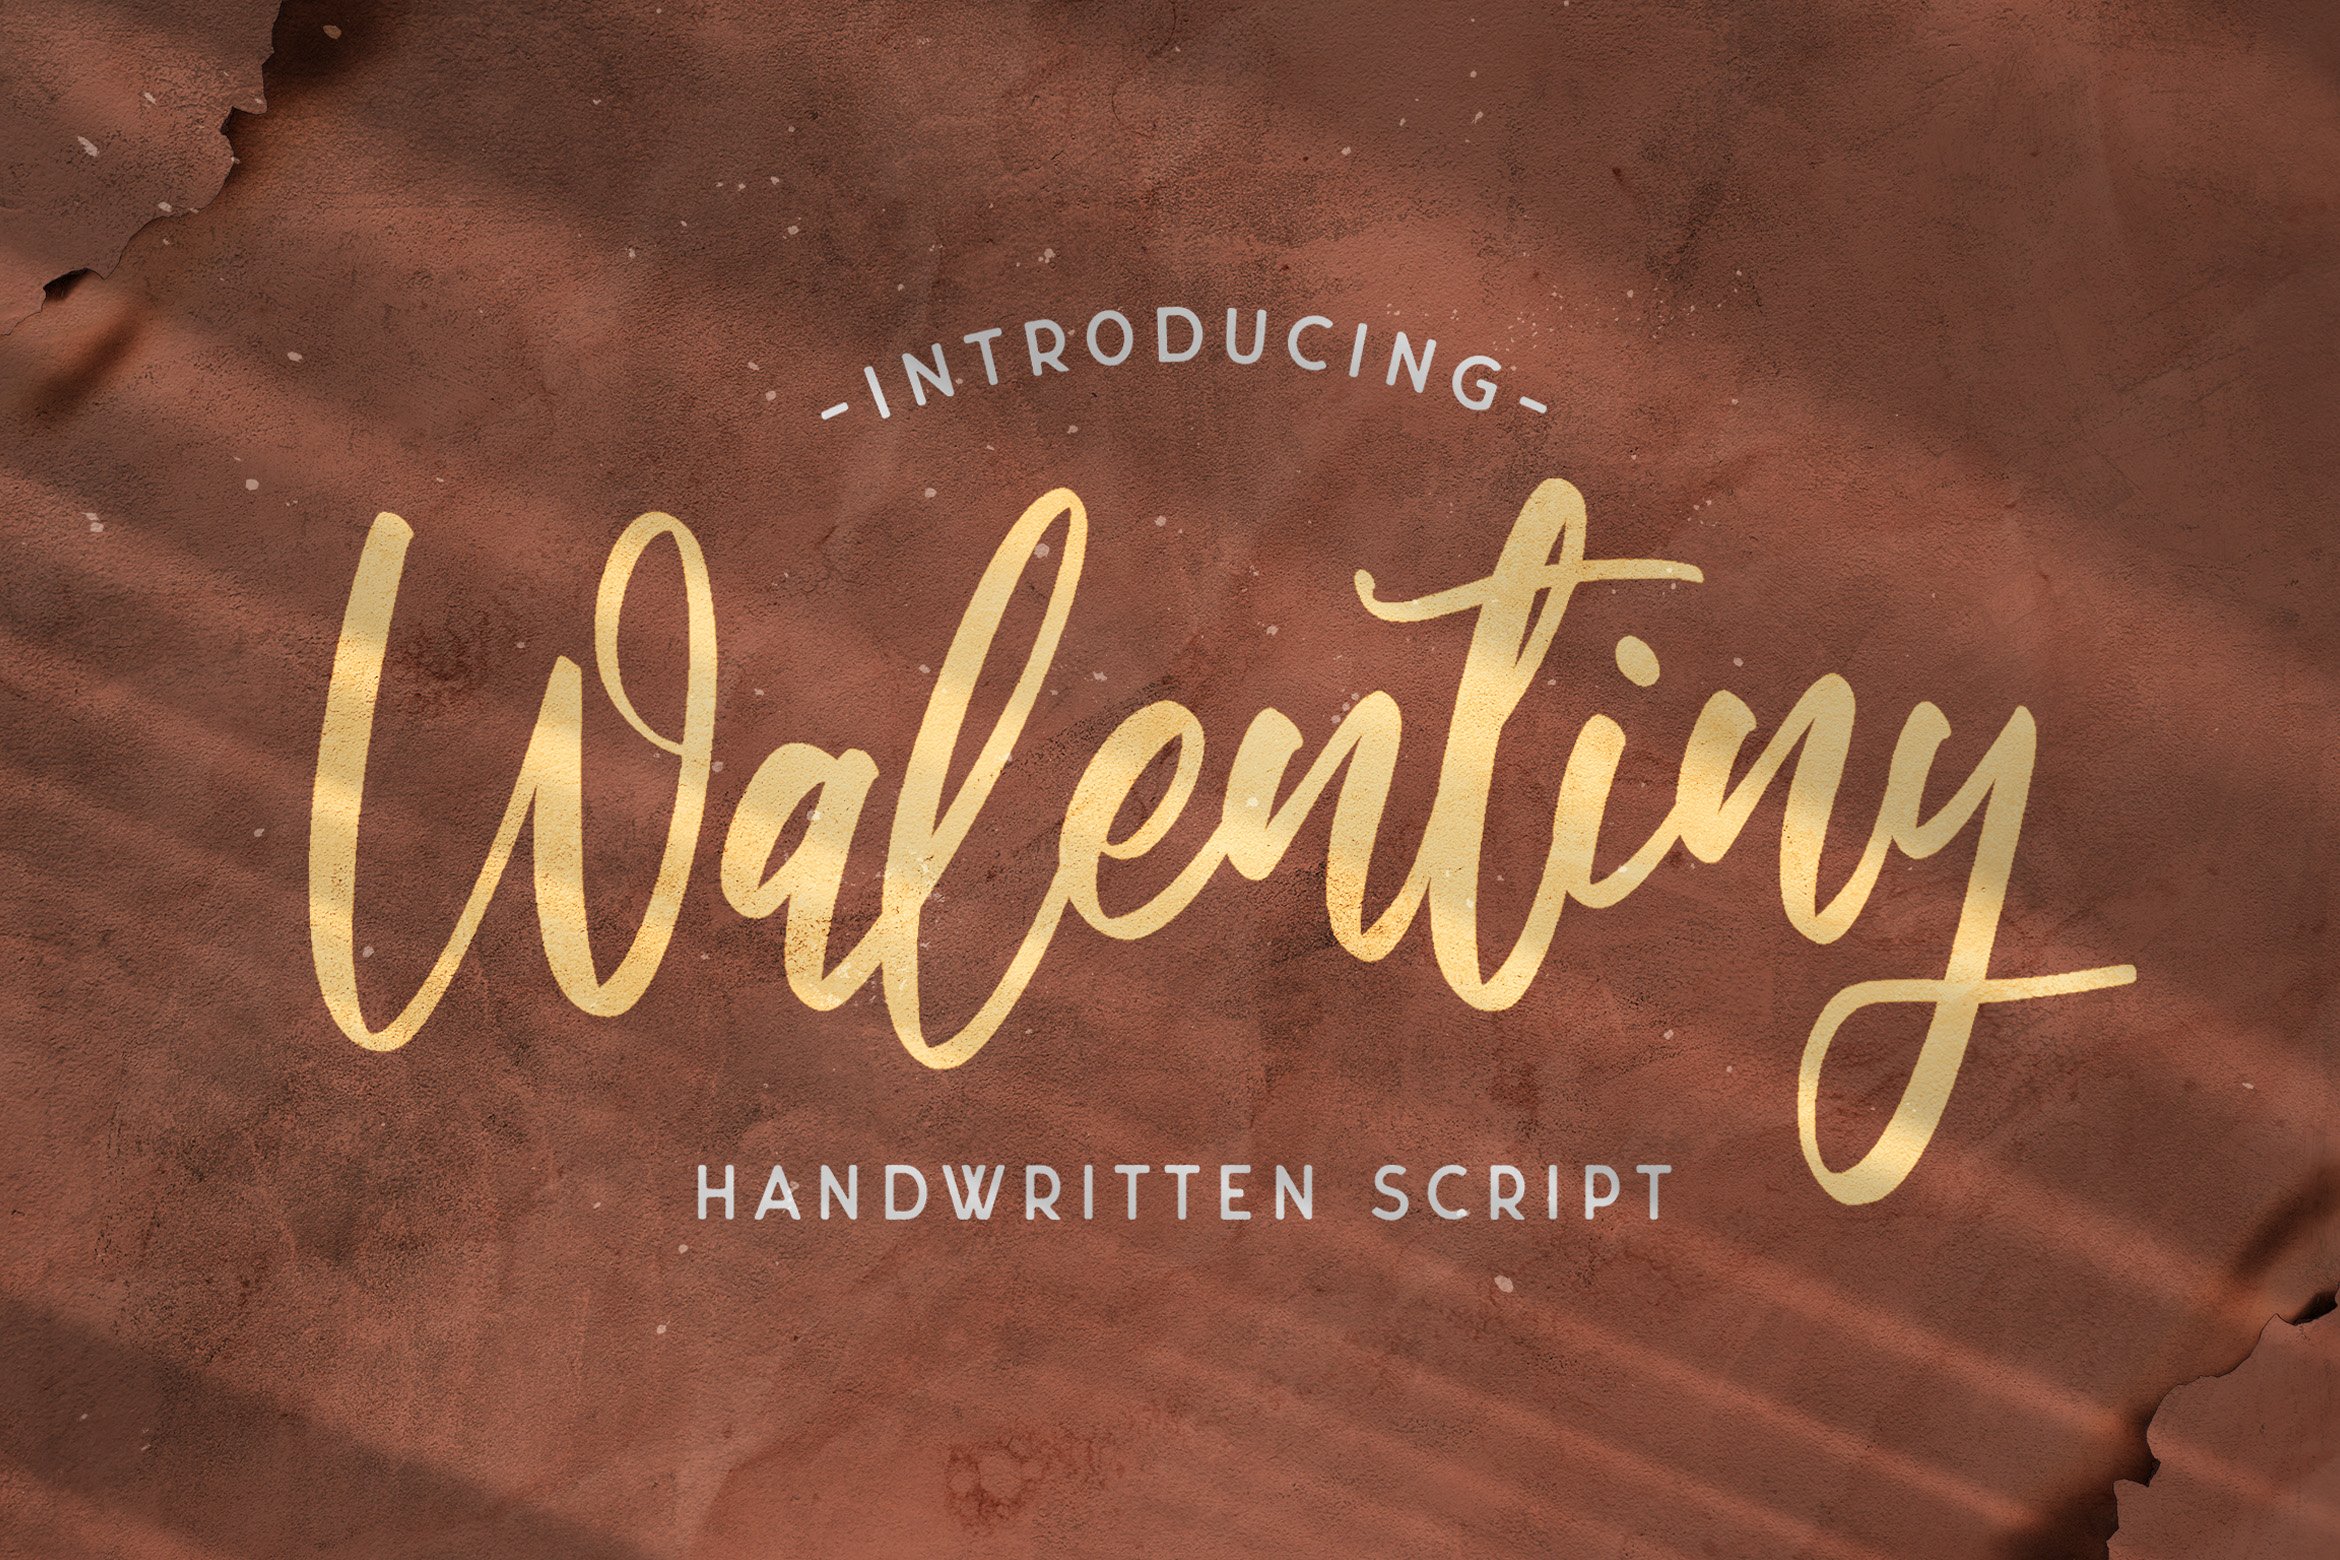 Walentiny - Handwritten Font cover image.